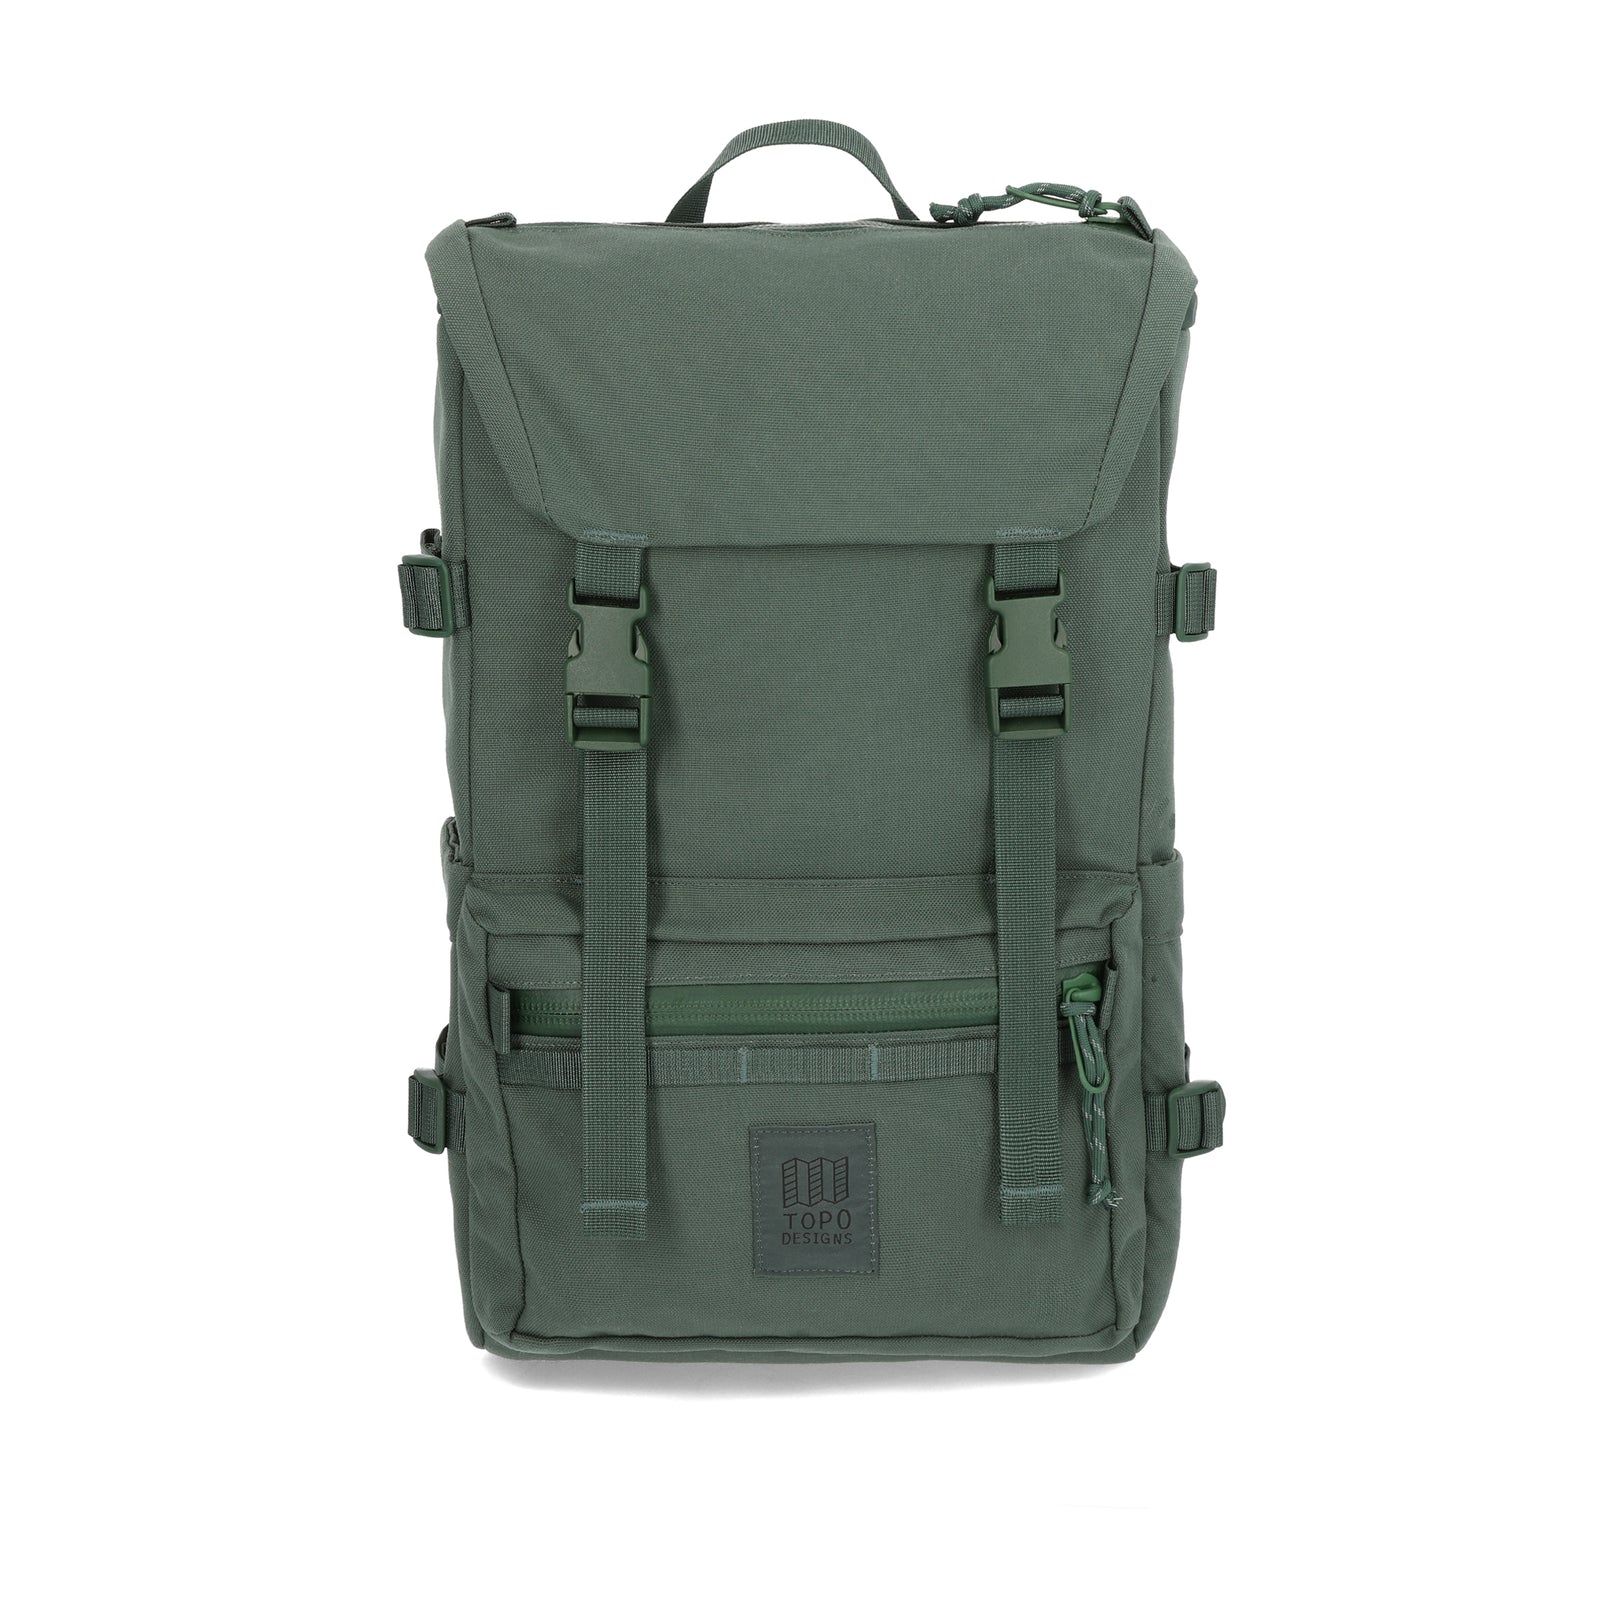 Front Product Shot of the Topo Designs Rover Pack Tech in "Forest" green.